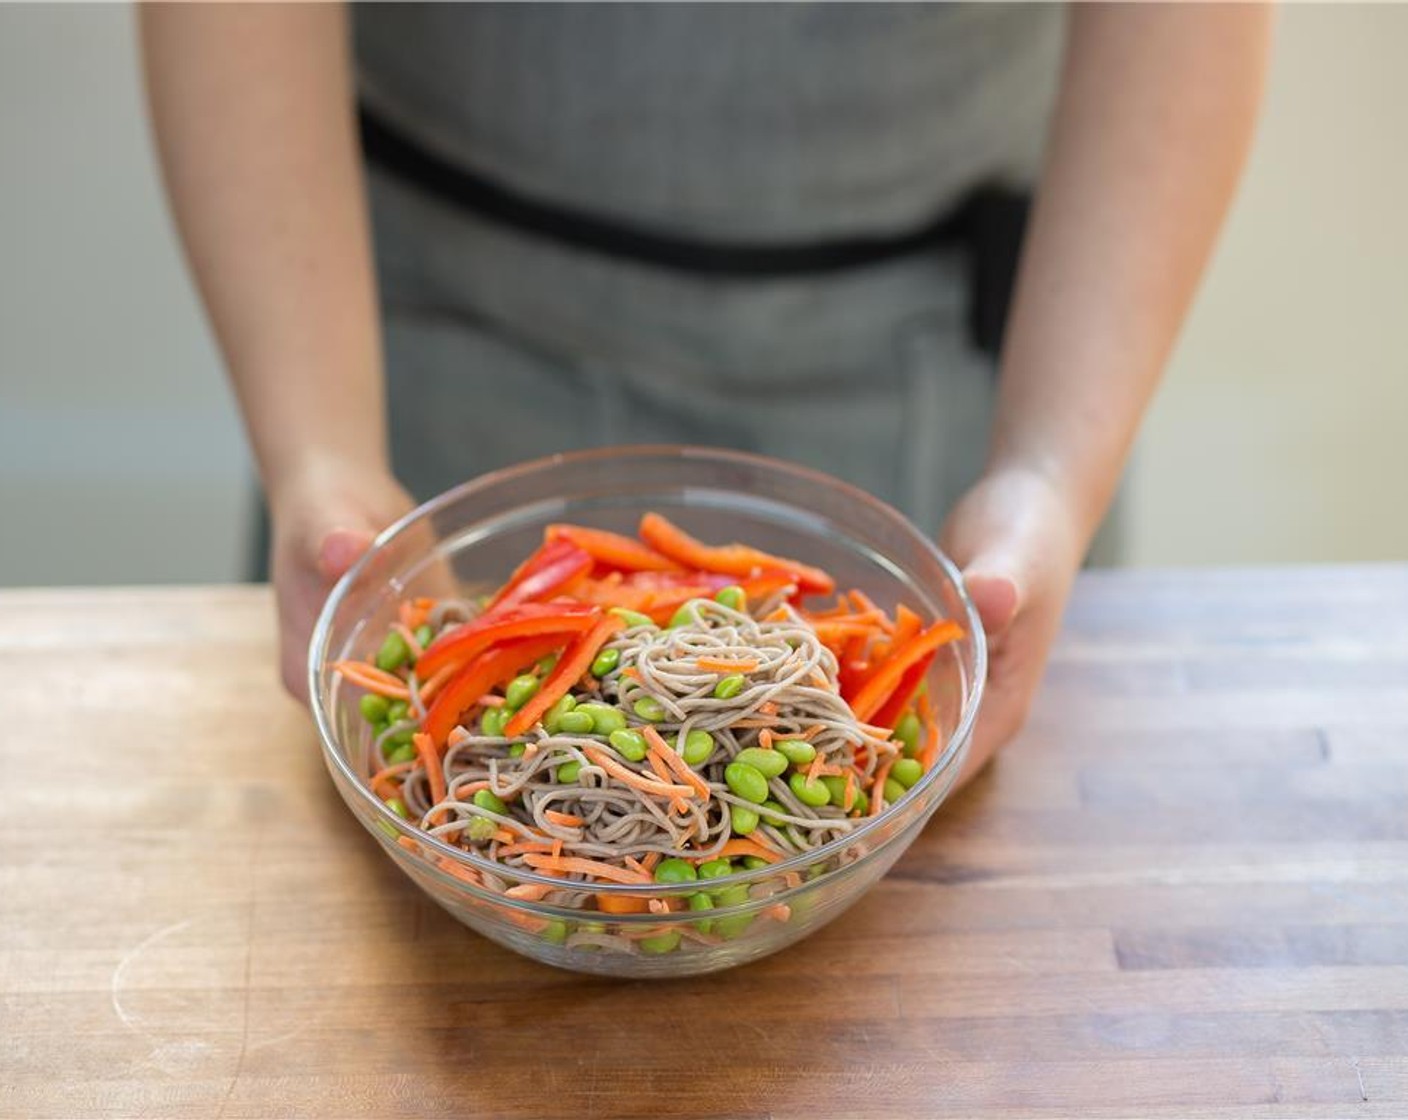 step 7 Place the noodles in a large bowl and add the bell peppers, carrots and Edamame (1/2 cup). Mix to combine.